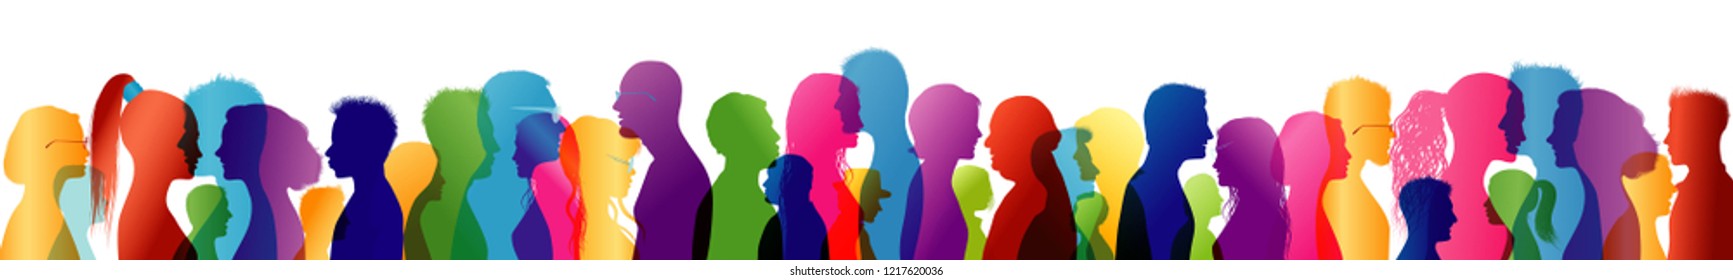 Crowd talking. Group of people talking. Speak. To communicate. Colored silhouette profiles